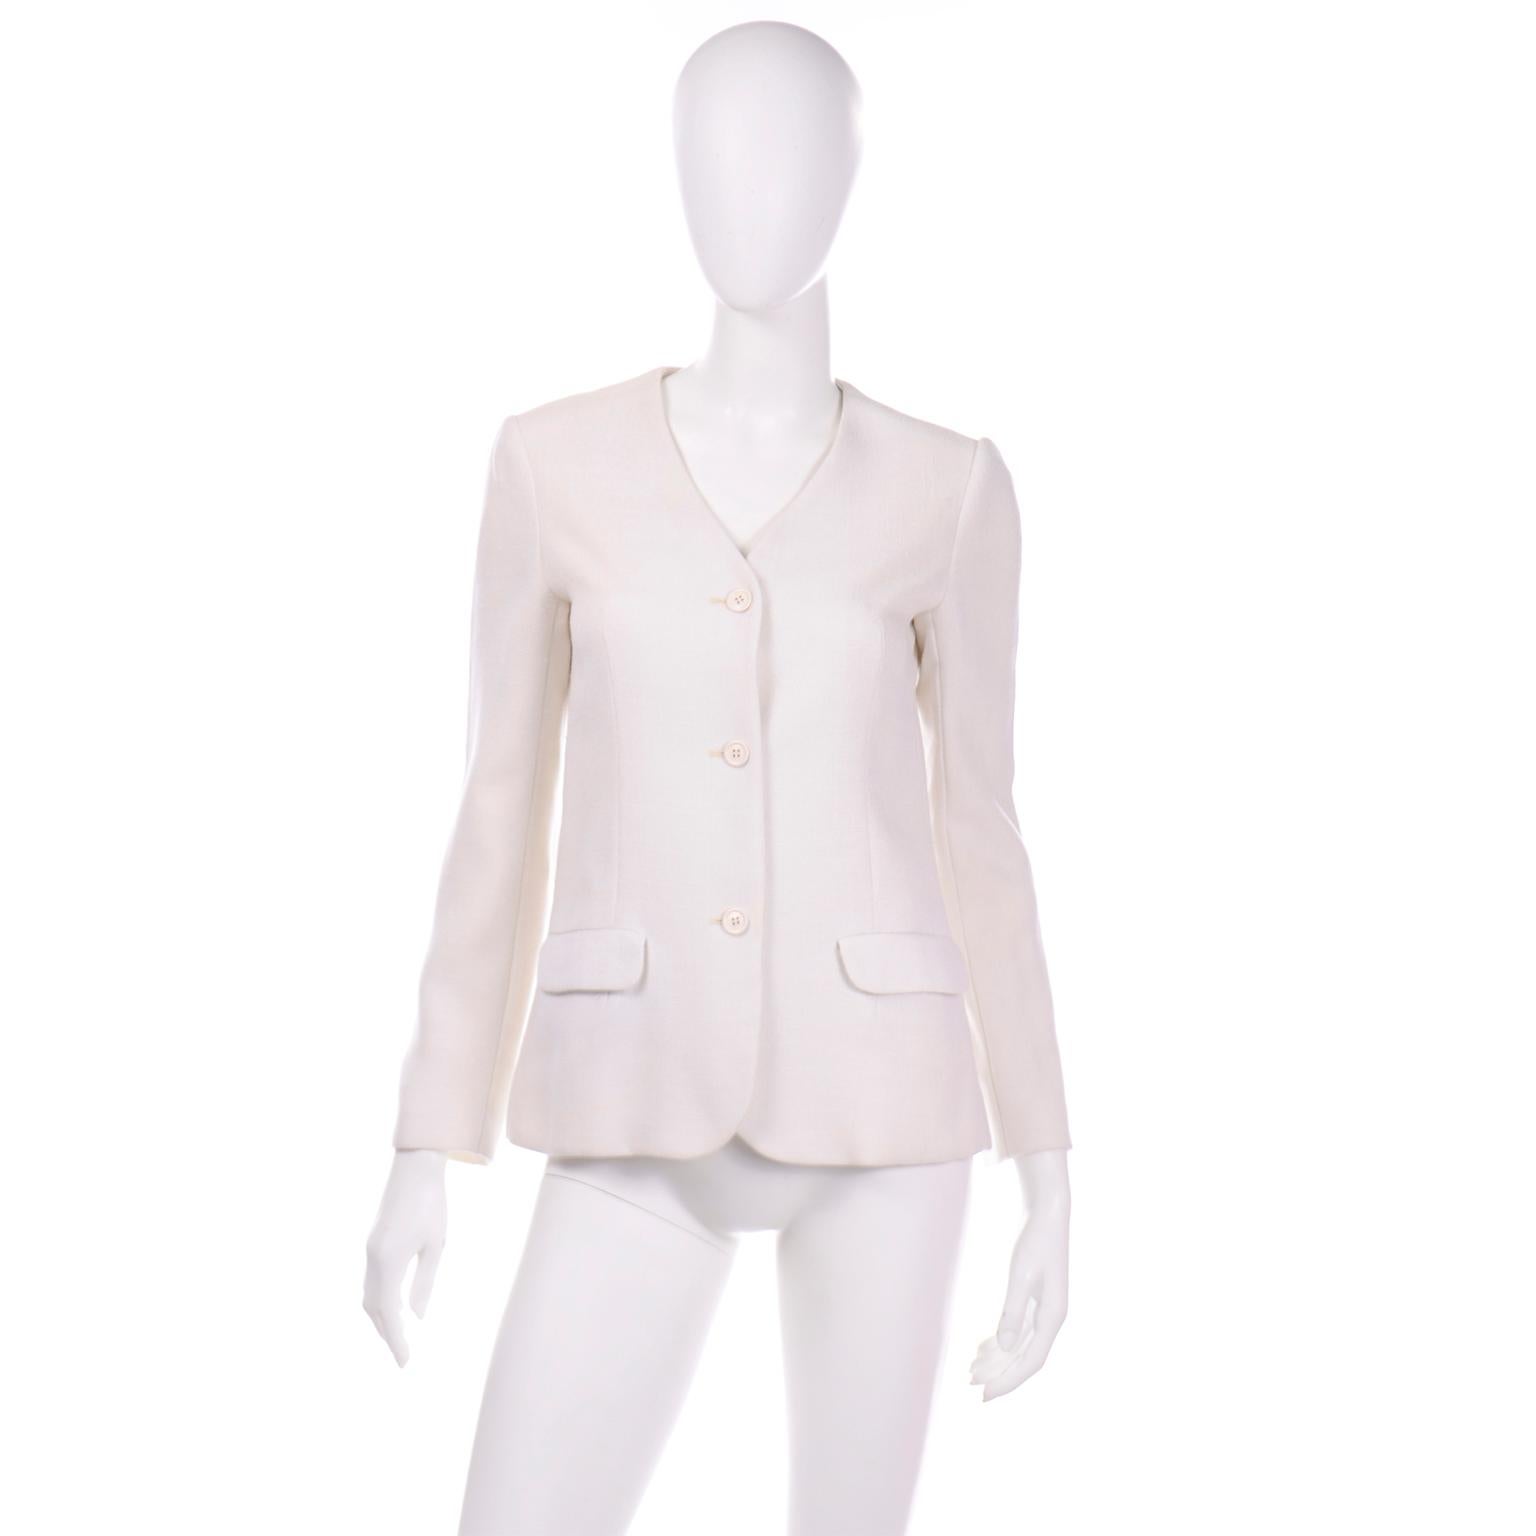 This is a versatile, late 1970's crisp ivory linen Halston vintage  jacket with a v-neckline. The front opening has ivory buttons and there are two front flap pockets and the jacket is cut in the familiar Halston style with all of the subtle details